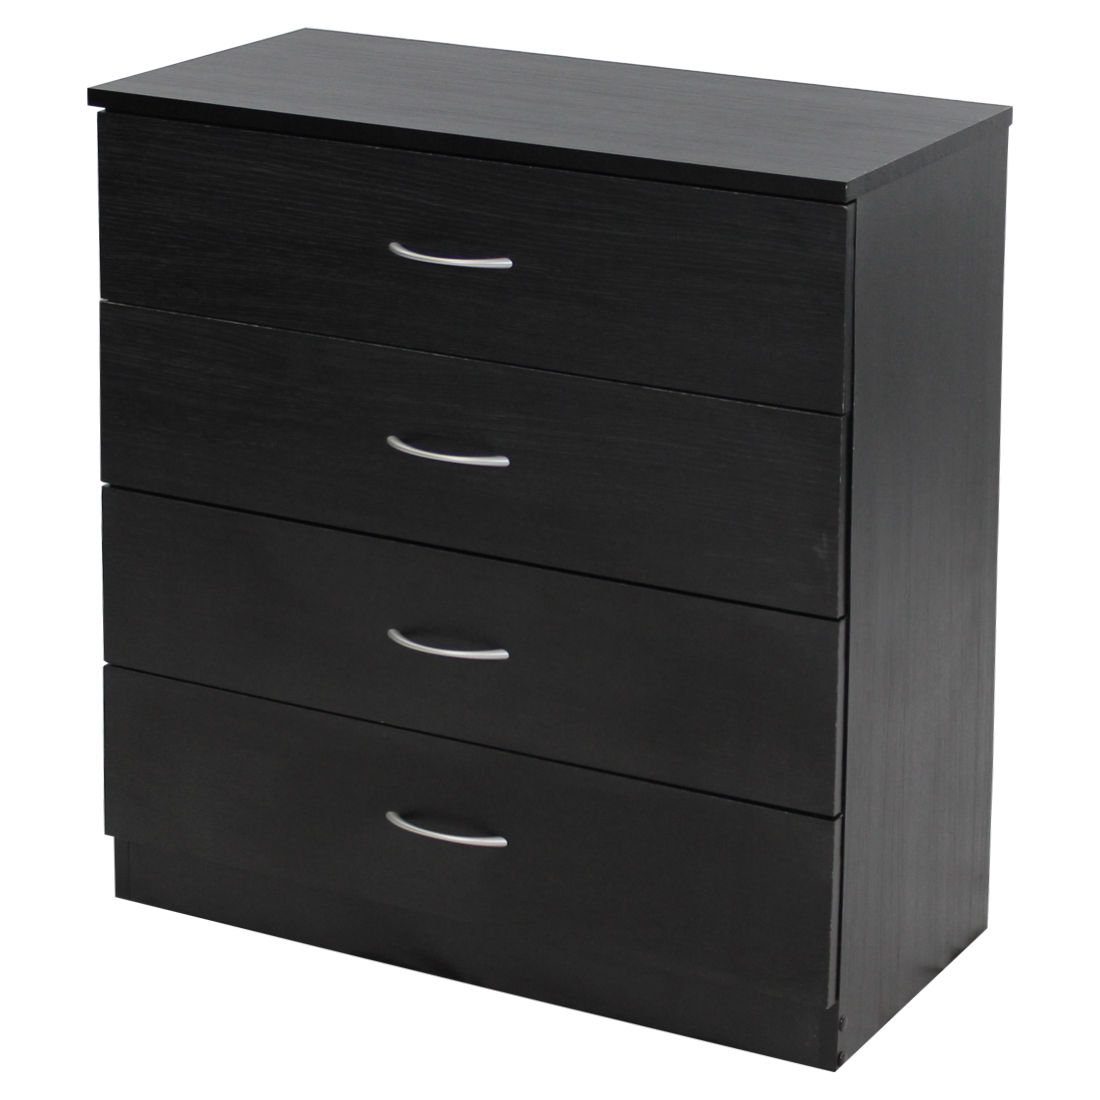 Black Wooden Chest of 4 Drawers - Home Treats UK